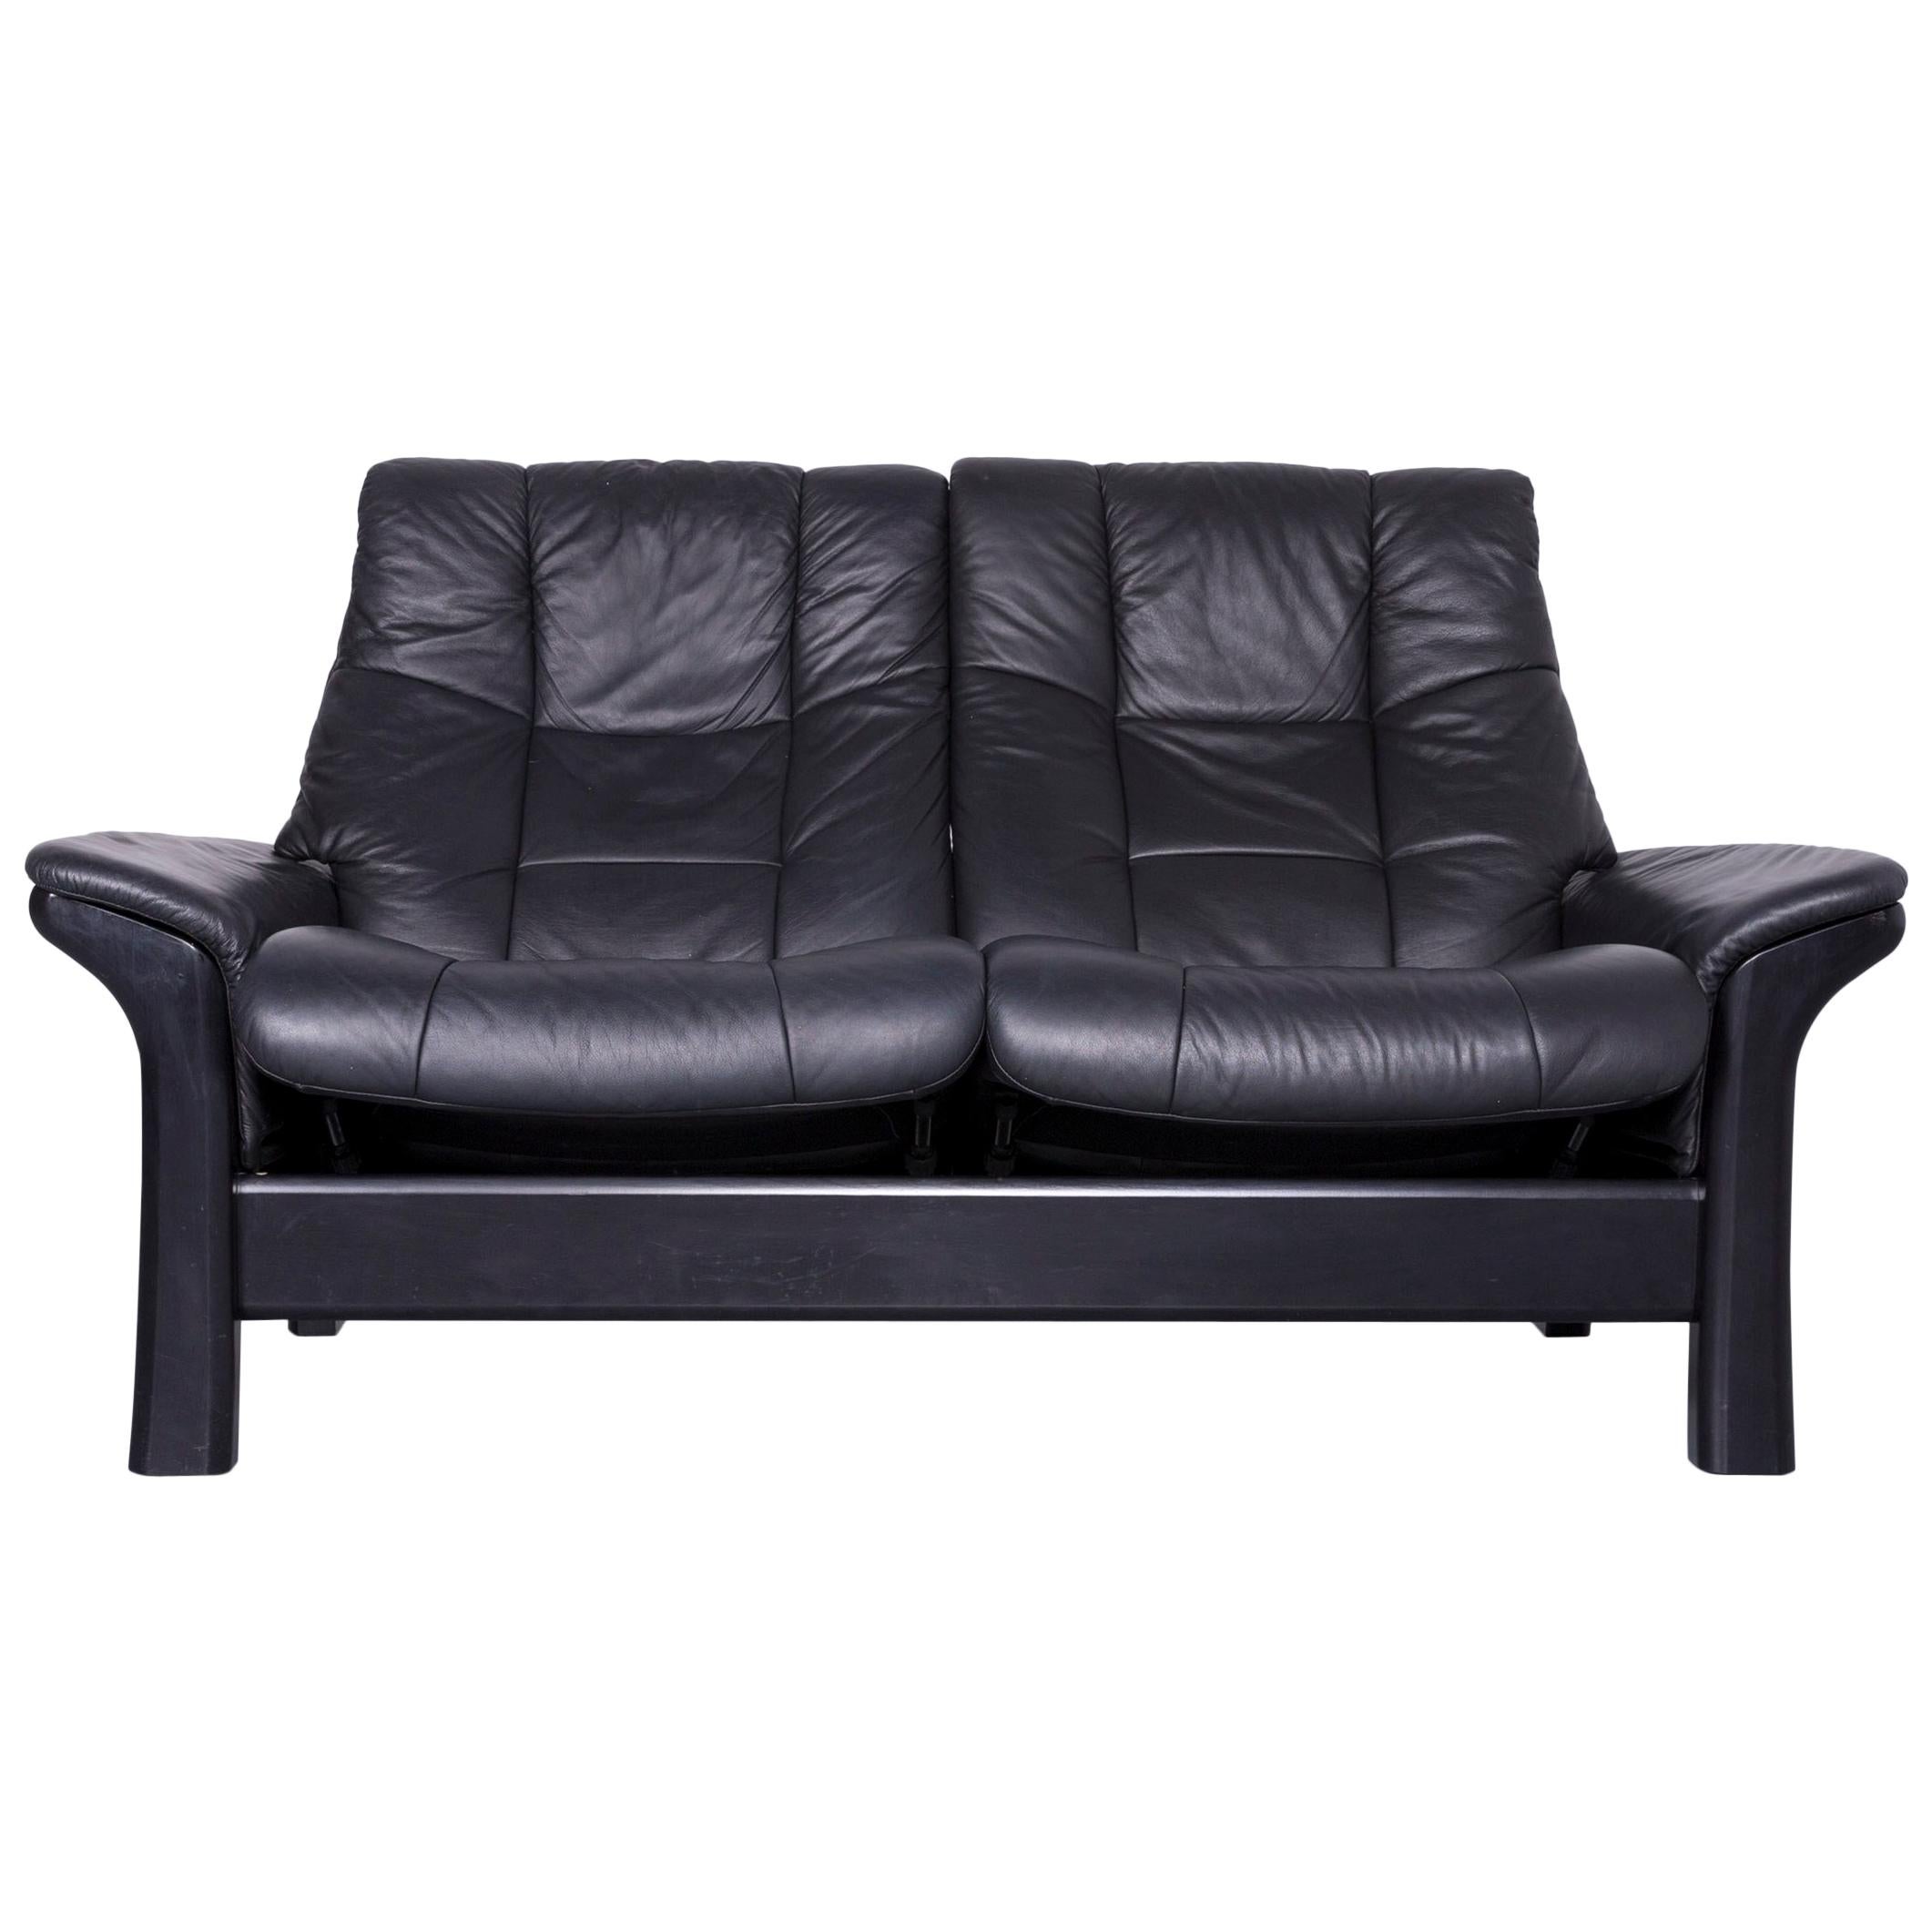 Stressless Buckingham Two-Seat Sofa Black Leather Couch with Function For Sale